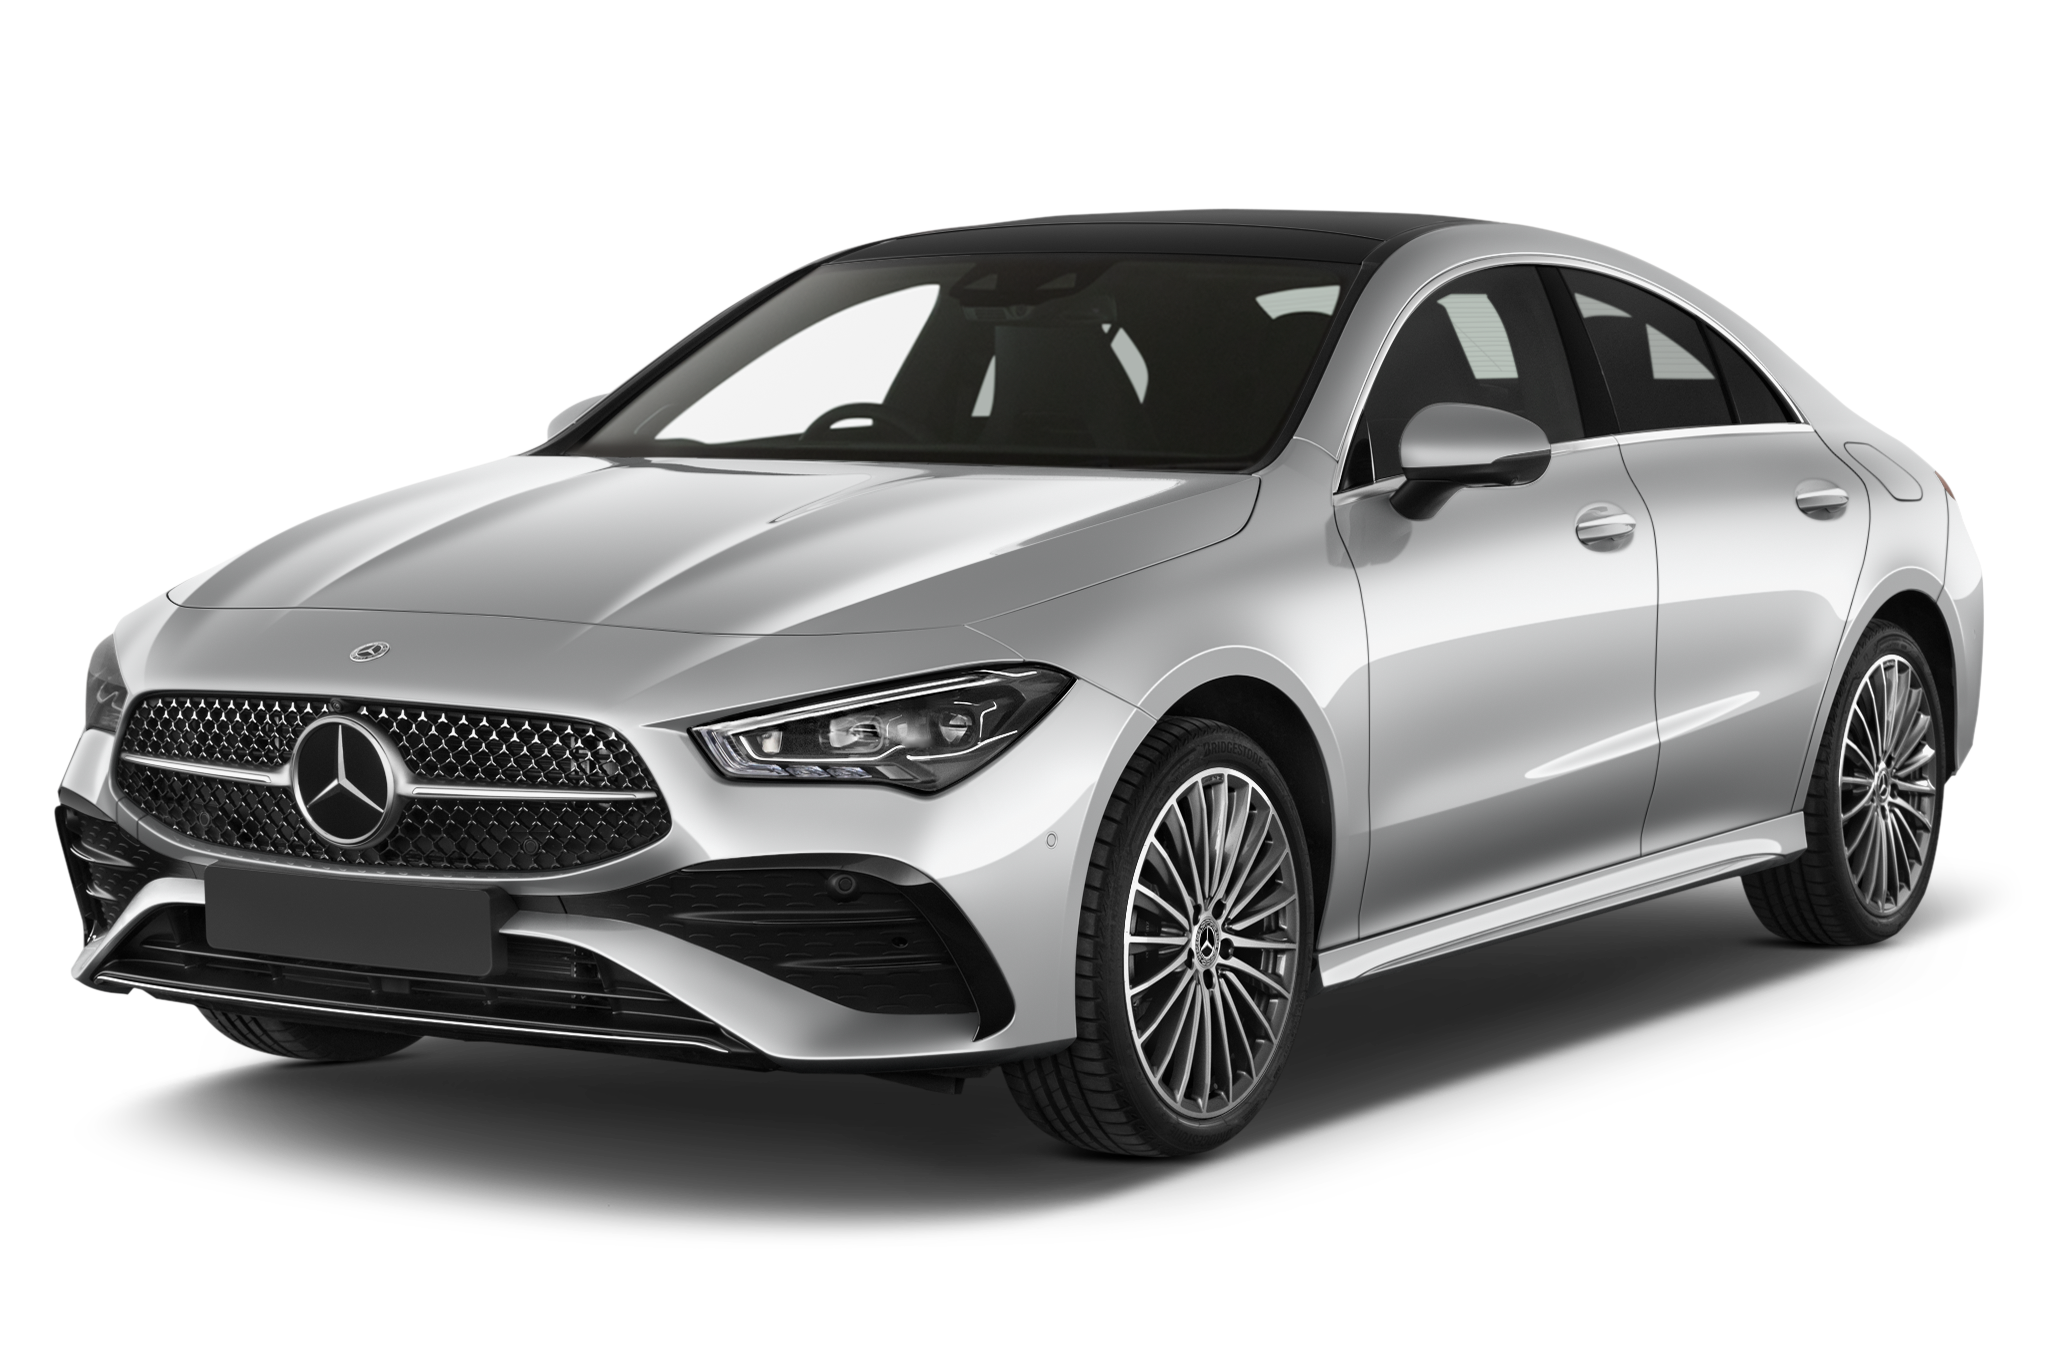 CLA Coupe Angular Front